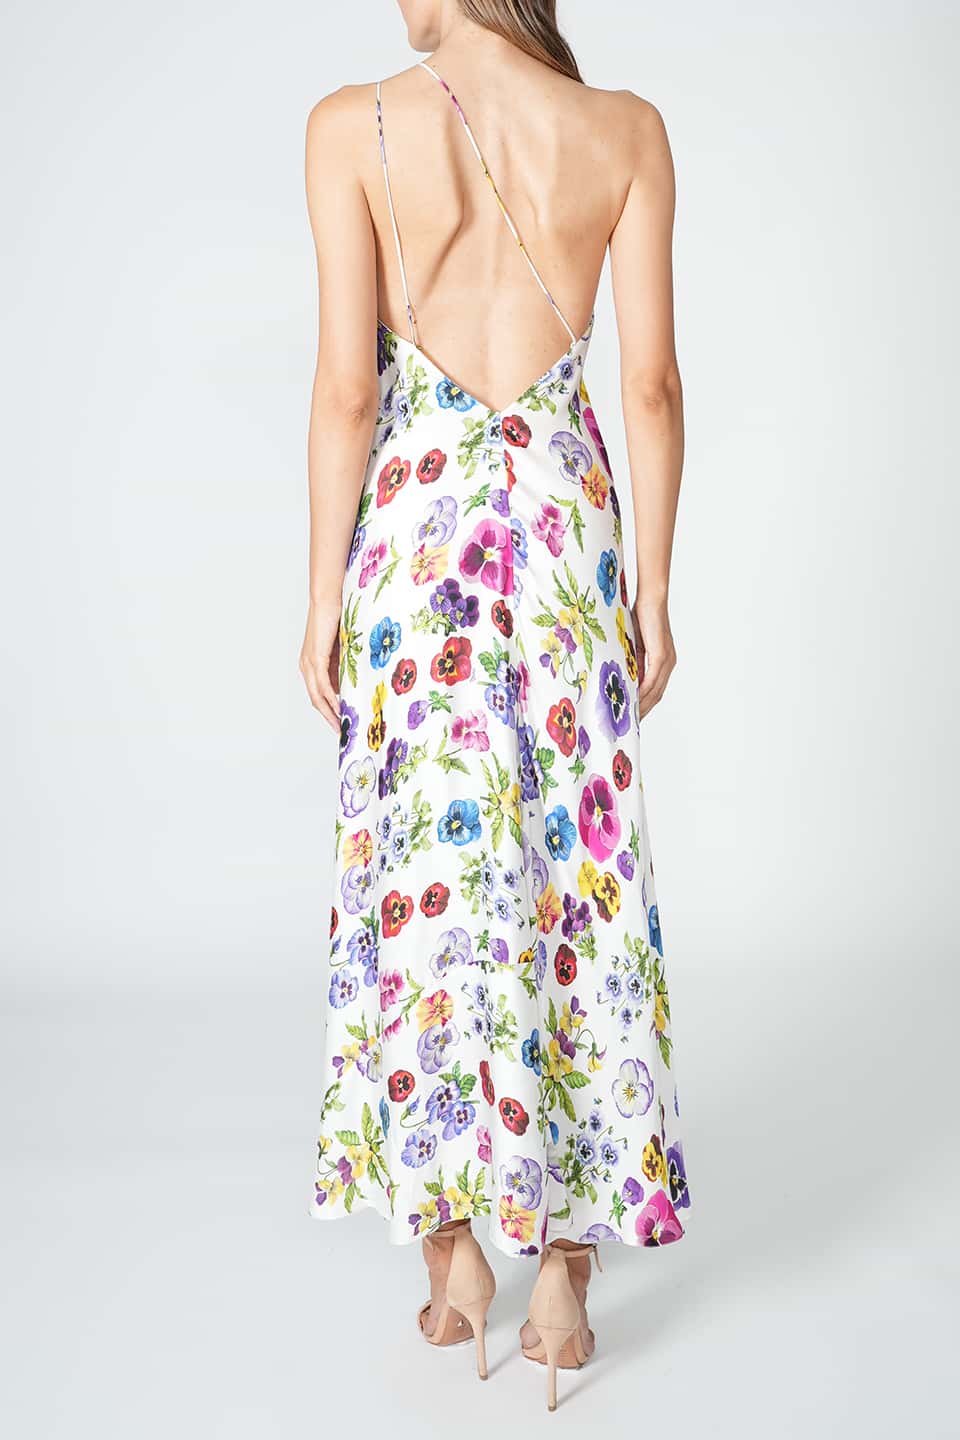 Thumbnail for Product gallery 5, Printed Satin Dress White